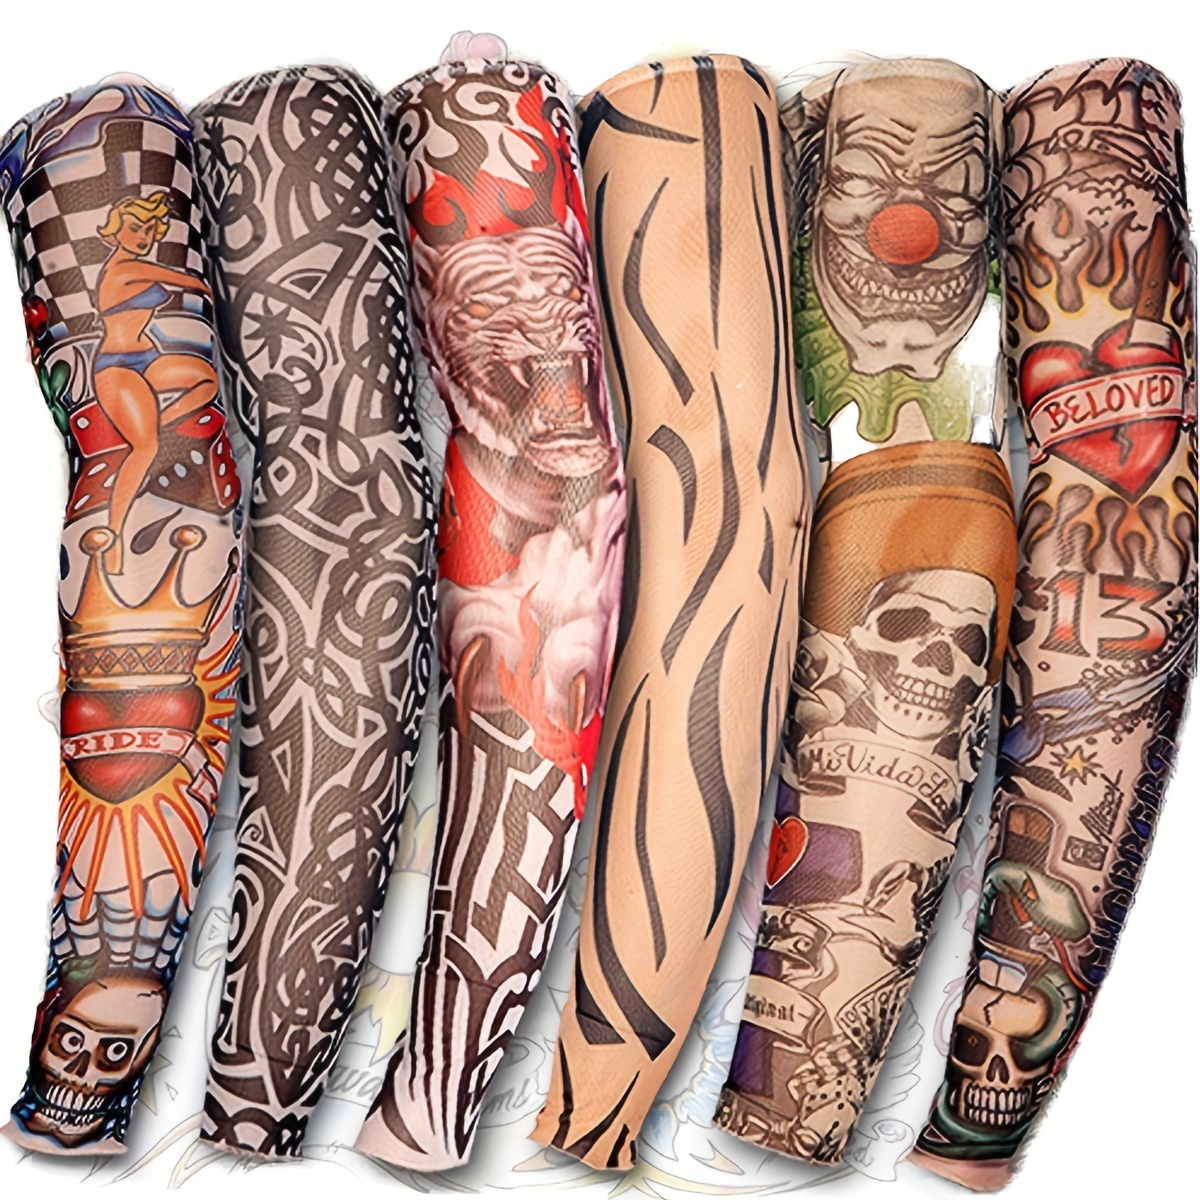 

6pcs Tattoo Sleeves, Summer Sunscreen Cool Sleeves, Outdoor Sports Cycling Fishing Sunscreen Sleeves For Men